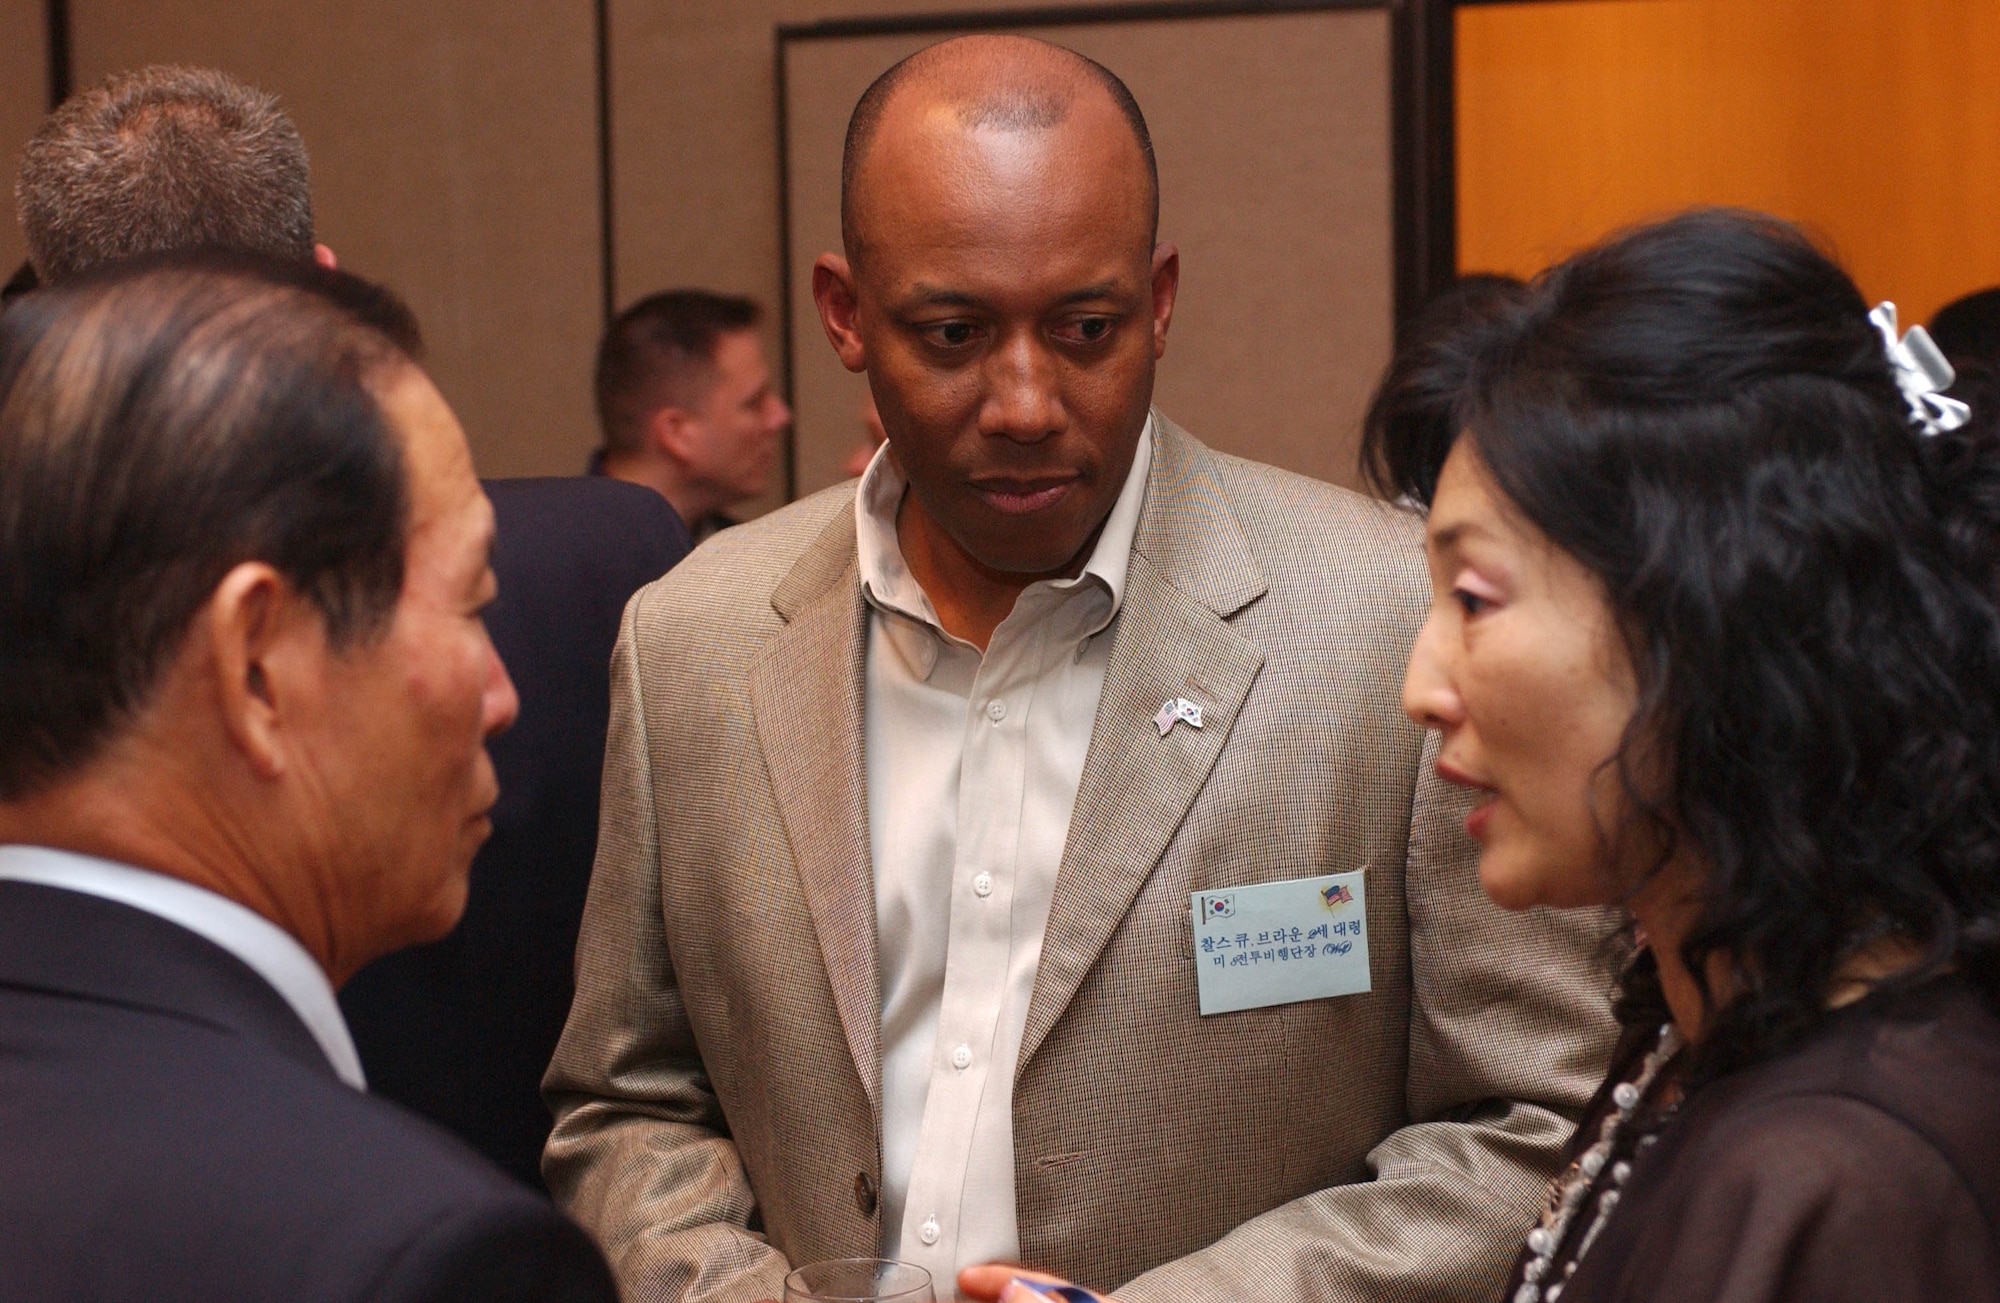 KUNSAN AIR BASE, Republic of Korea -- Col. CQ "Wolf" Brown, 8th Fighter Wing commander, talks with Gunsan City Mayor, Moon, Dong Shin, and Rosemary Song, 8th FW Public Affairs Office Community Relations Chief at the officer's club June 22. Colonel Brown hosted a dinner for eight Gunsan City civic leaders, including Mayor Moon.  The dinner provided a chance for Kunsan Air Base to build relationships with host-nation civic leaders and partners from Gunsan City. (U.S. Air Force photo/Senior Airman Steven Doty) 
                                                            
                             